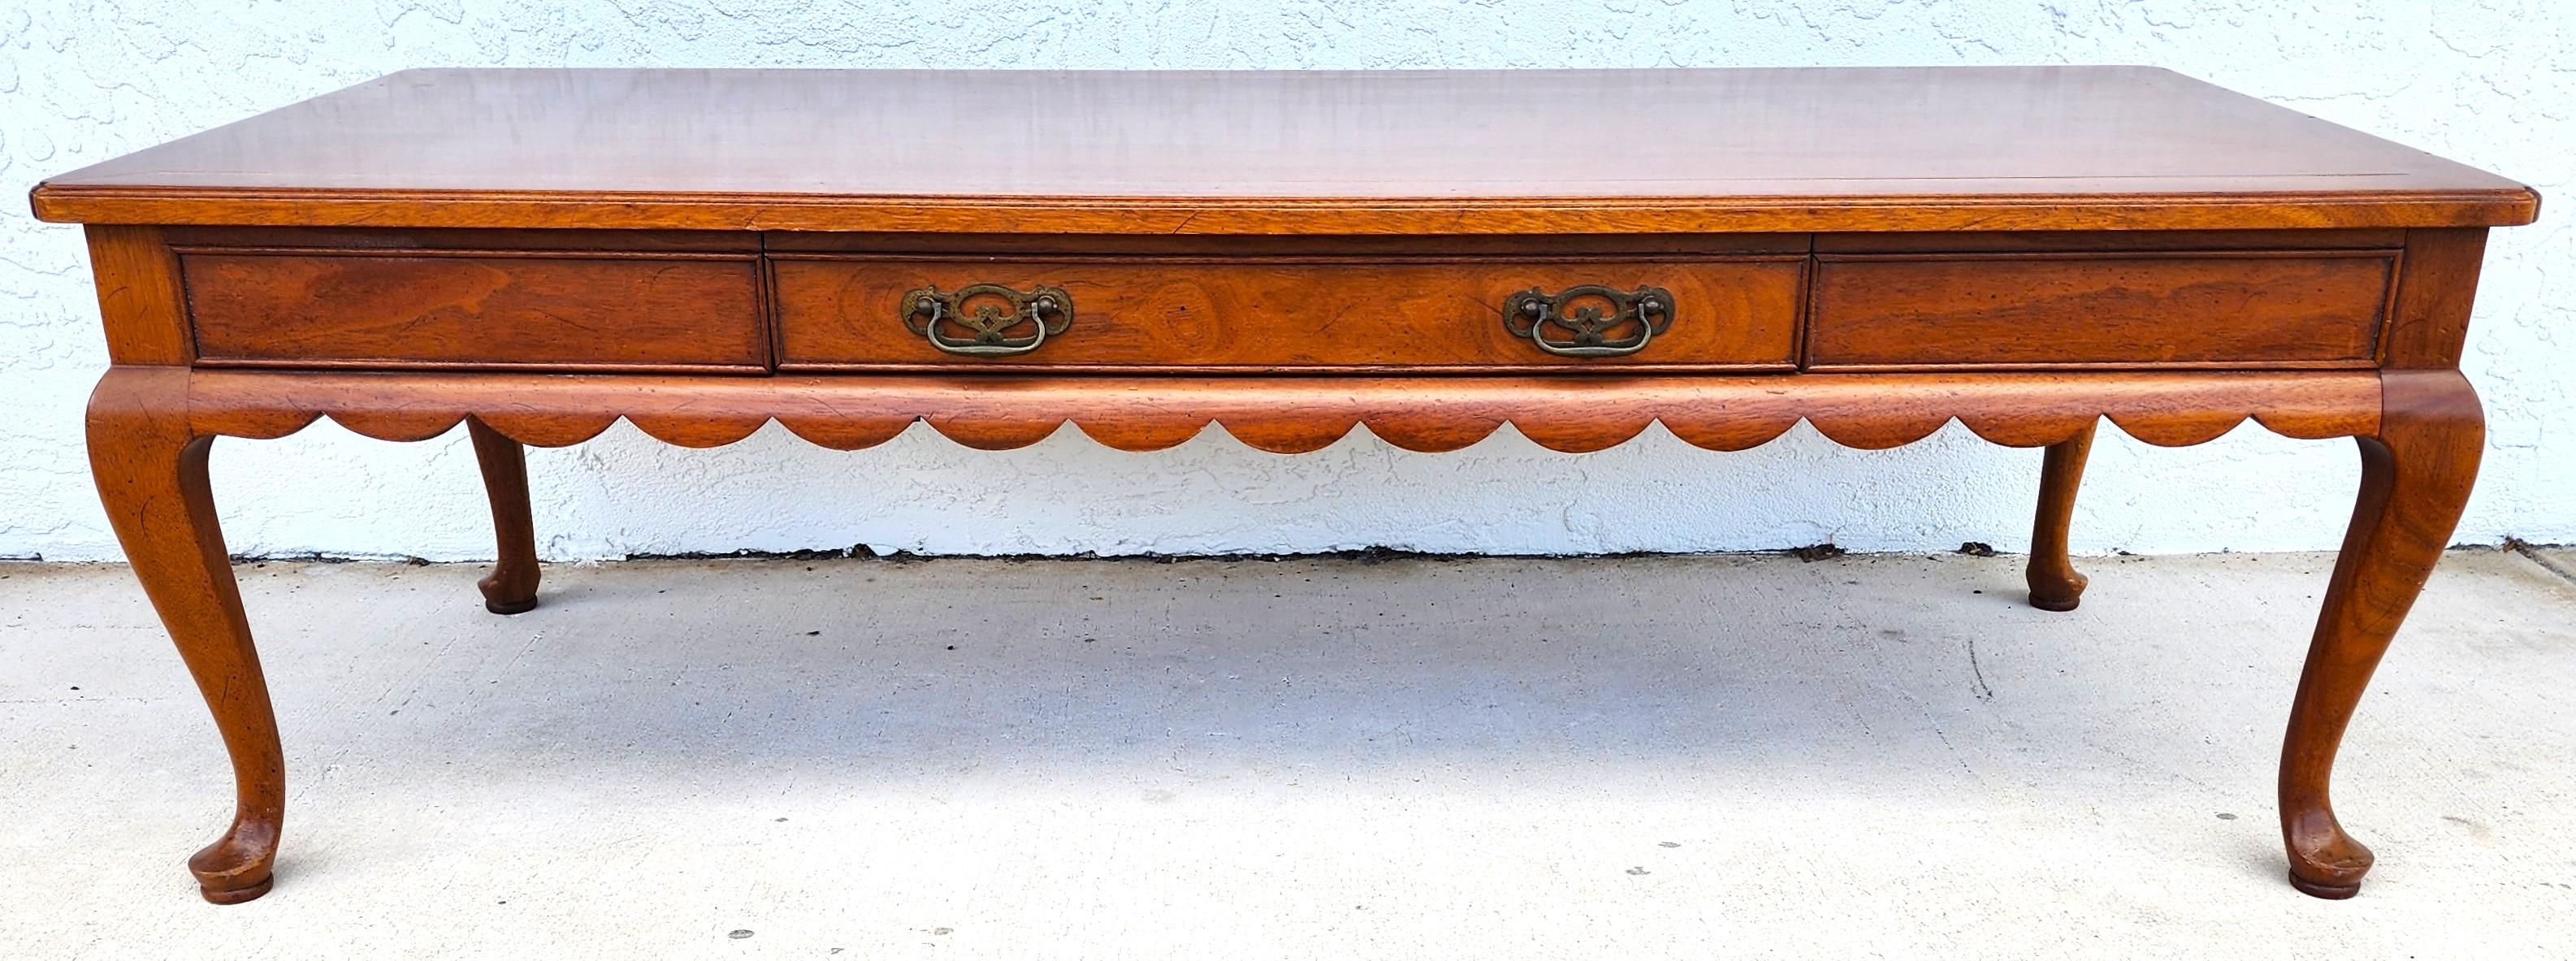 For FULL item description click on CONTINUE READING at the bottom of this page.
Offering One Of Our Recent Palm Beach Estate Fine Furniture Acquisitions Of A
Vintage French Country Coffee Table by HENREDON
With 1 drawer

Approximate Measurements in